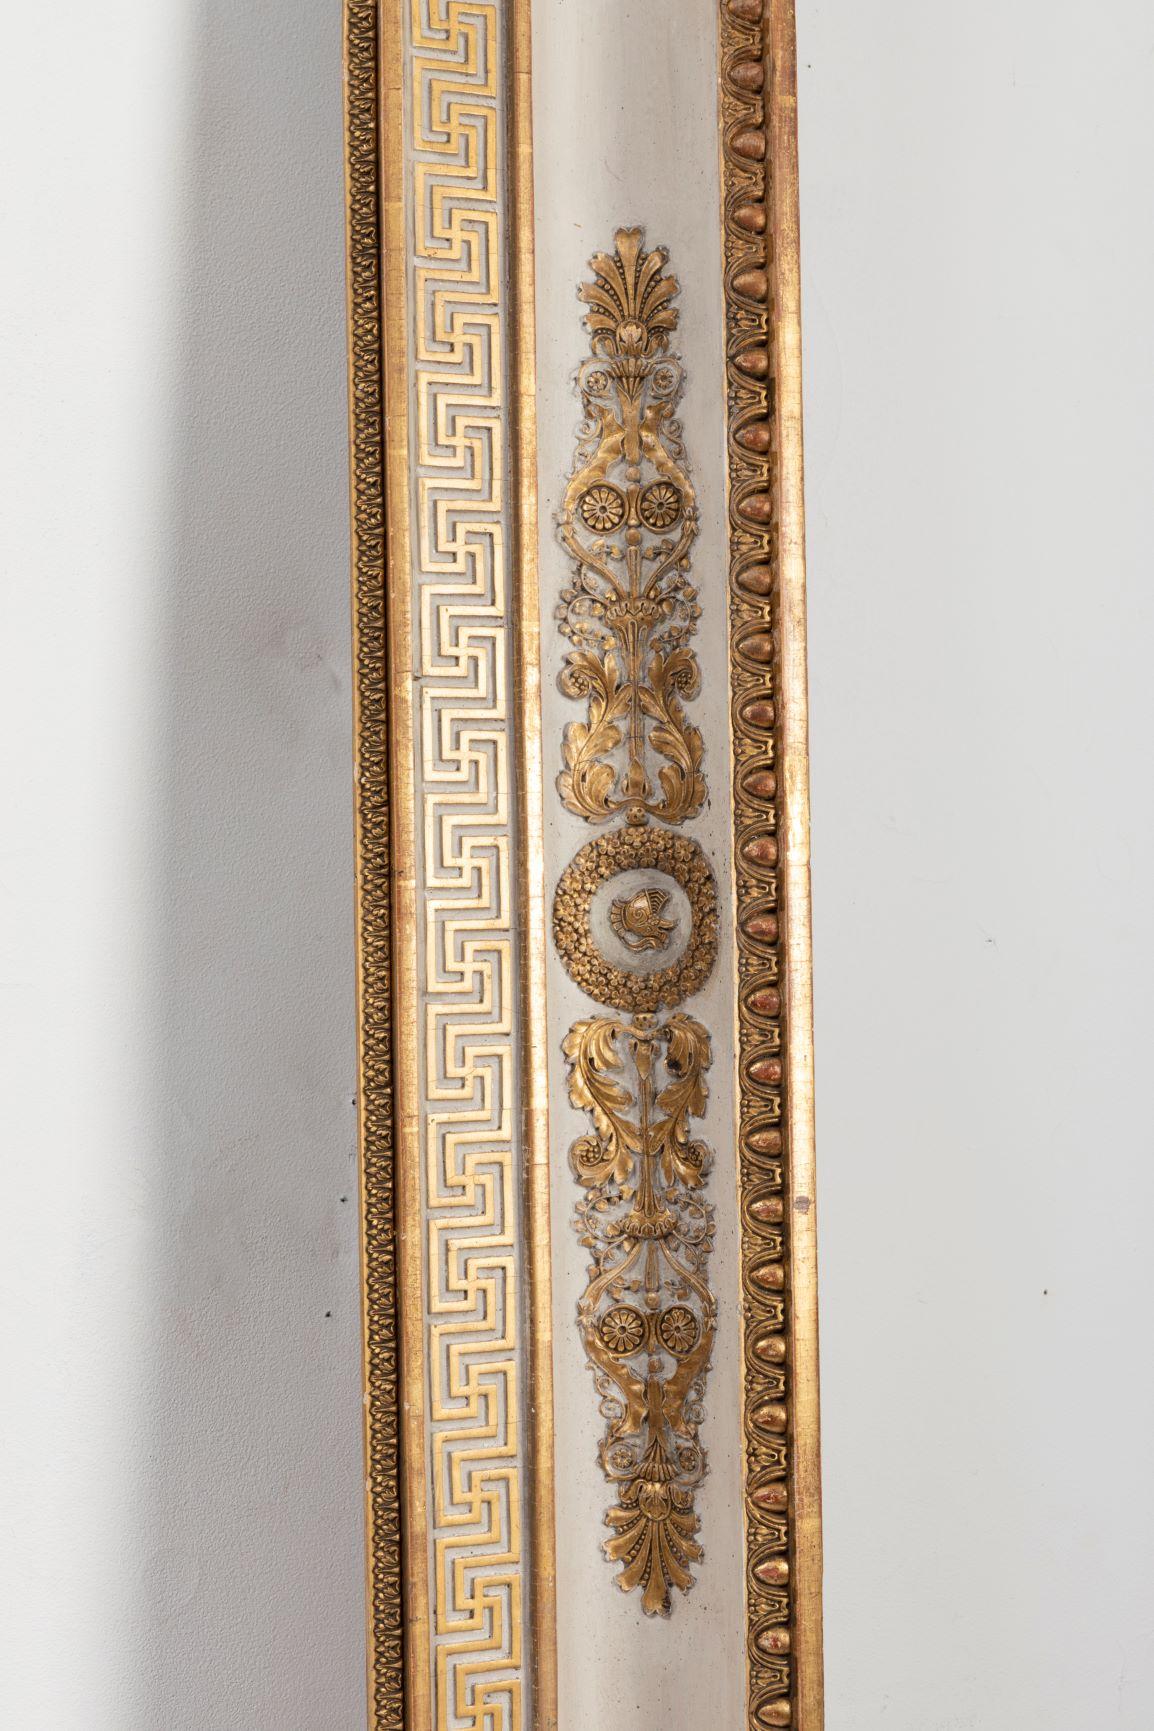 European Splendid French Empire Carved Giltwood Frame or Mirror France Early 19th Century For Sale